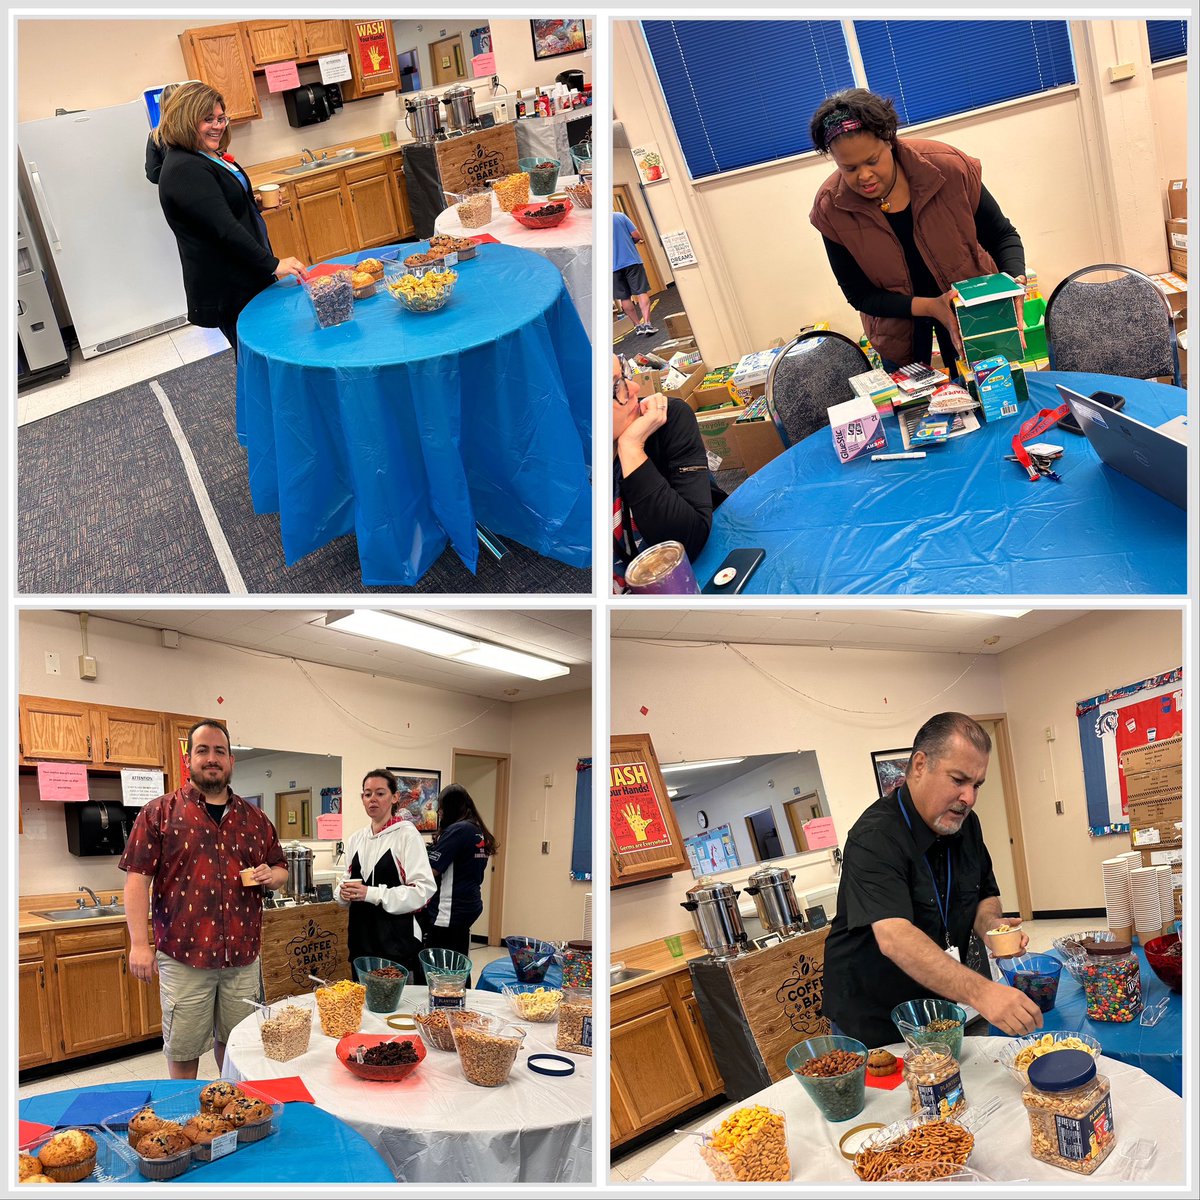 Day 2 of Teacher (Staff) Appreciation Week! We hosted a Trail Mix Bar and the staff dressed like the Superheroes they are! 💙❤️🤍 #teacherappreciationweek #proudprincipal #principallife